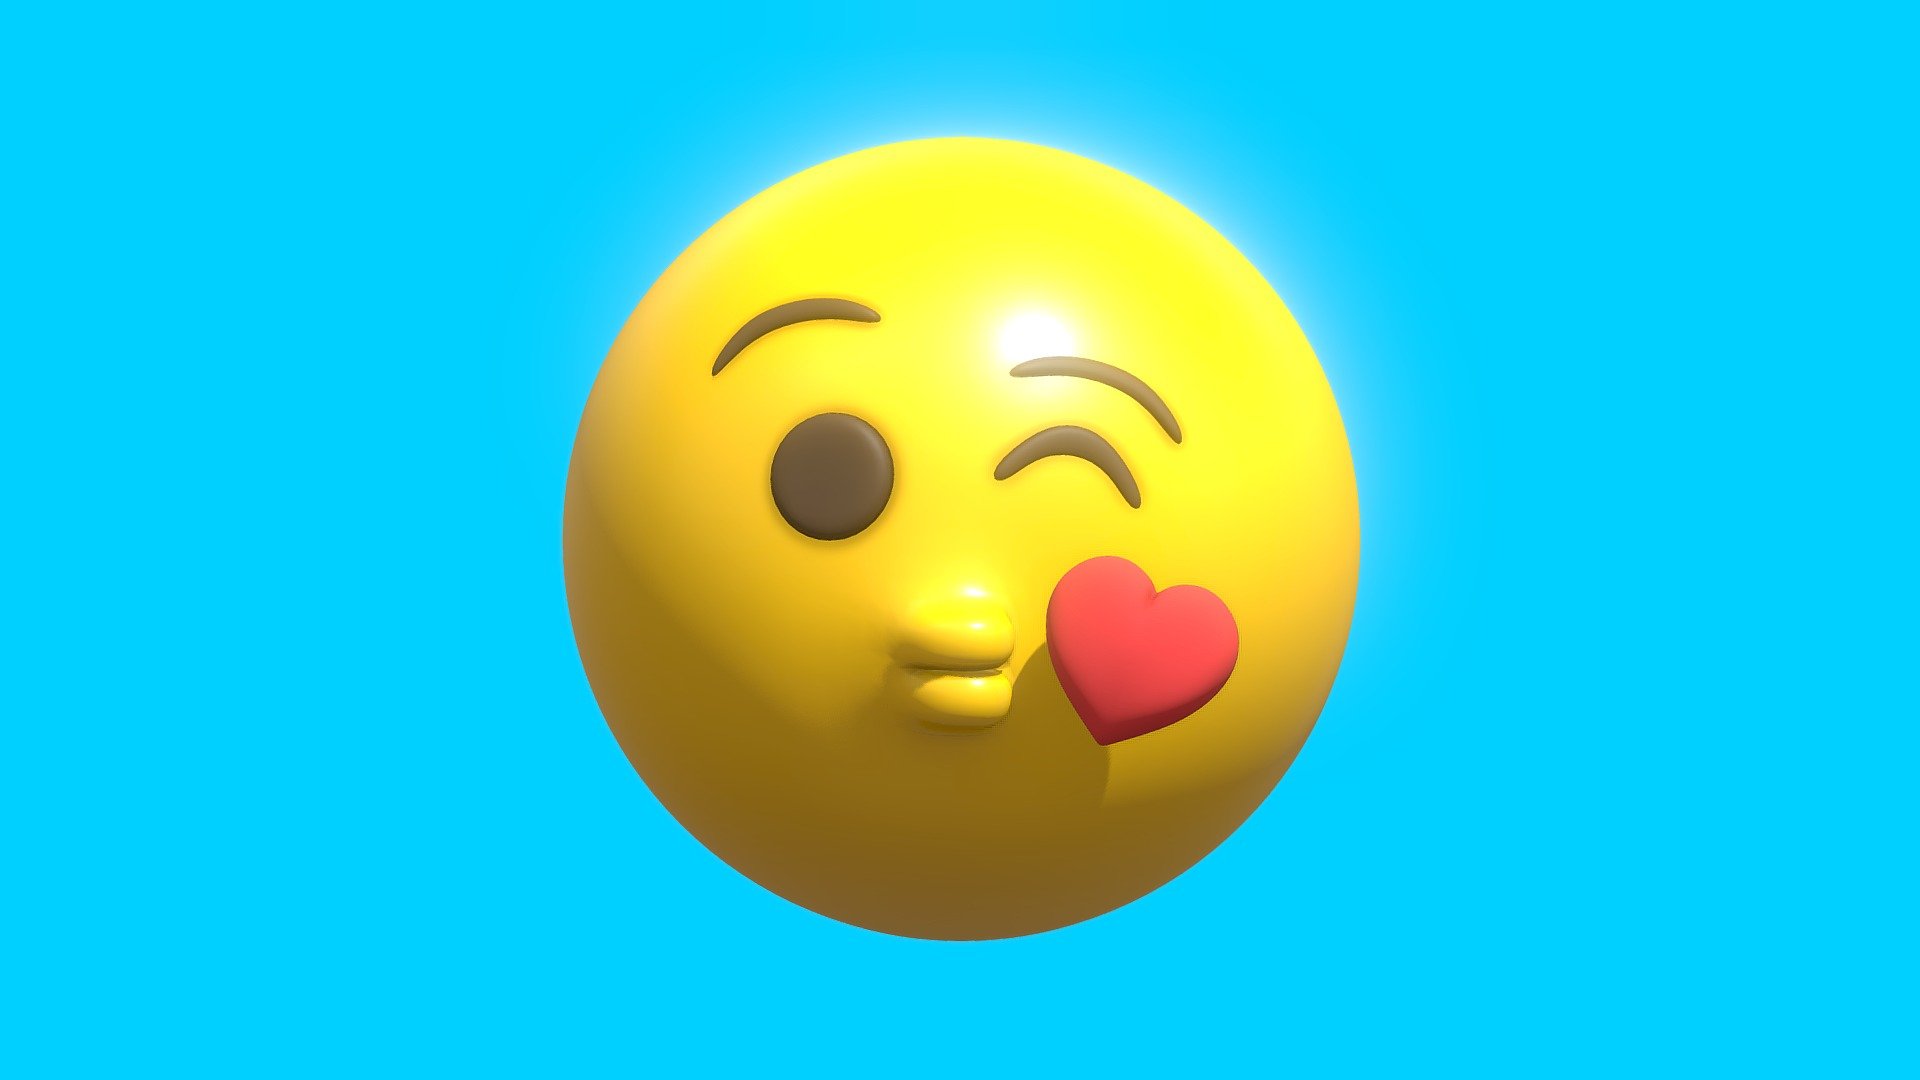 Blow a Kiss Emoticon Emoji or Smiley - Buy Royalty Free 3D model by ...